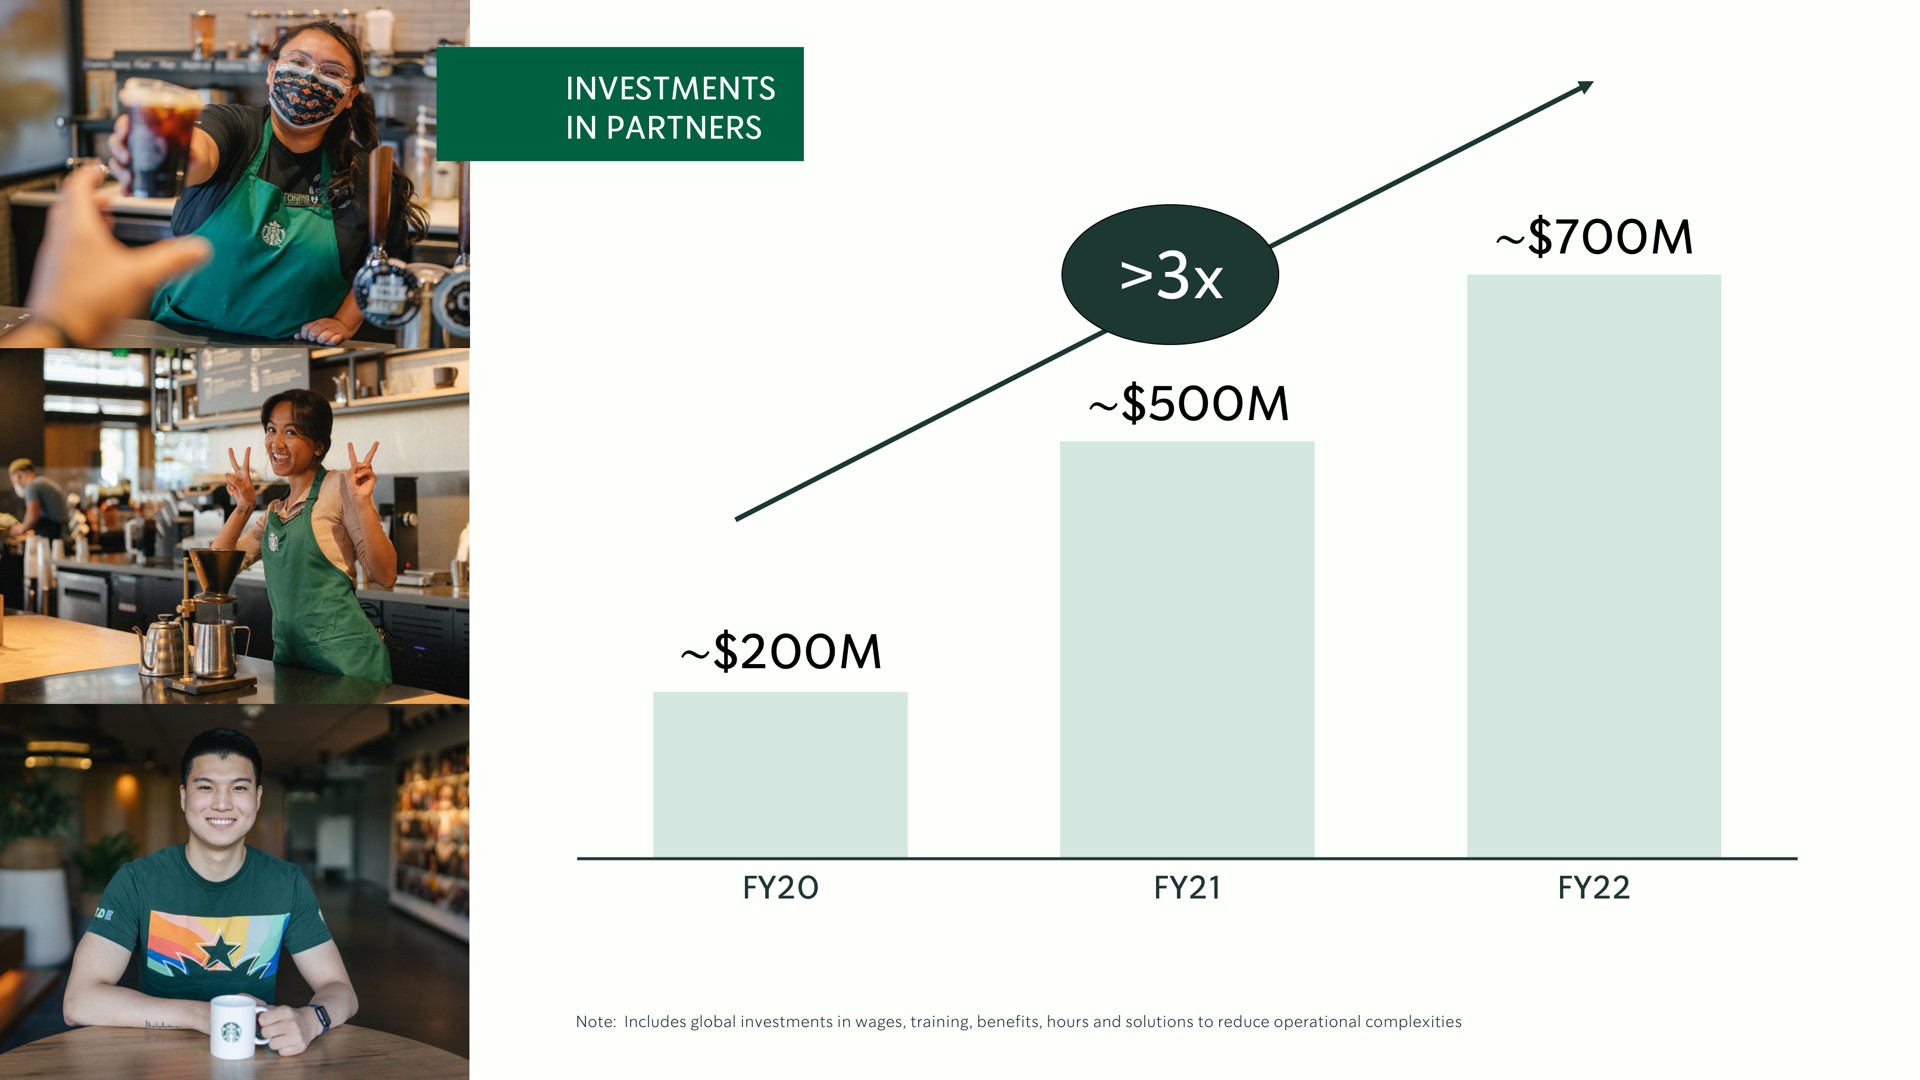 investments in partners | Starbucks